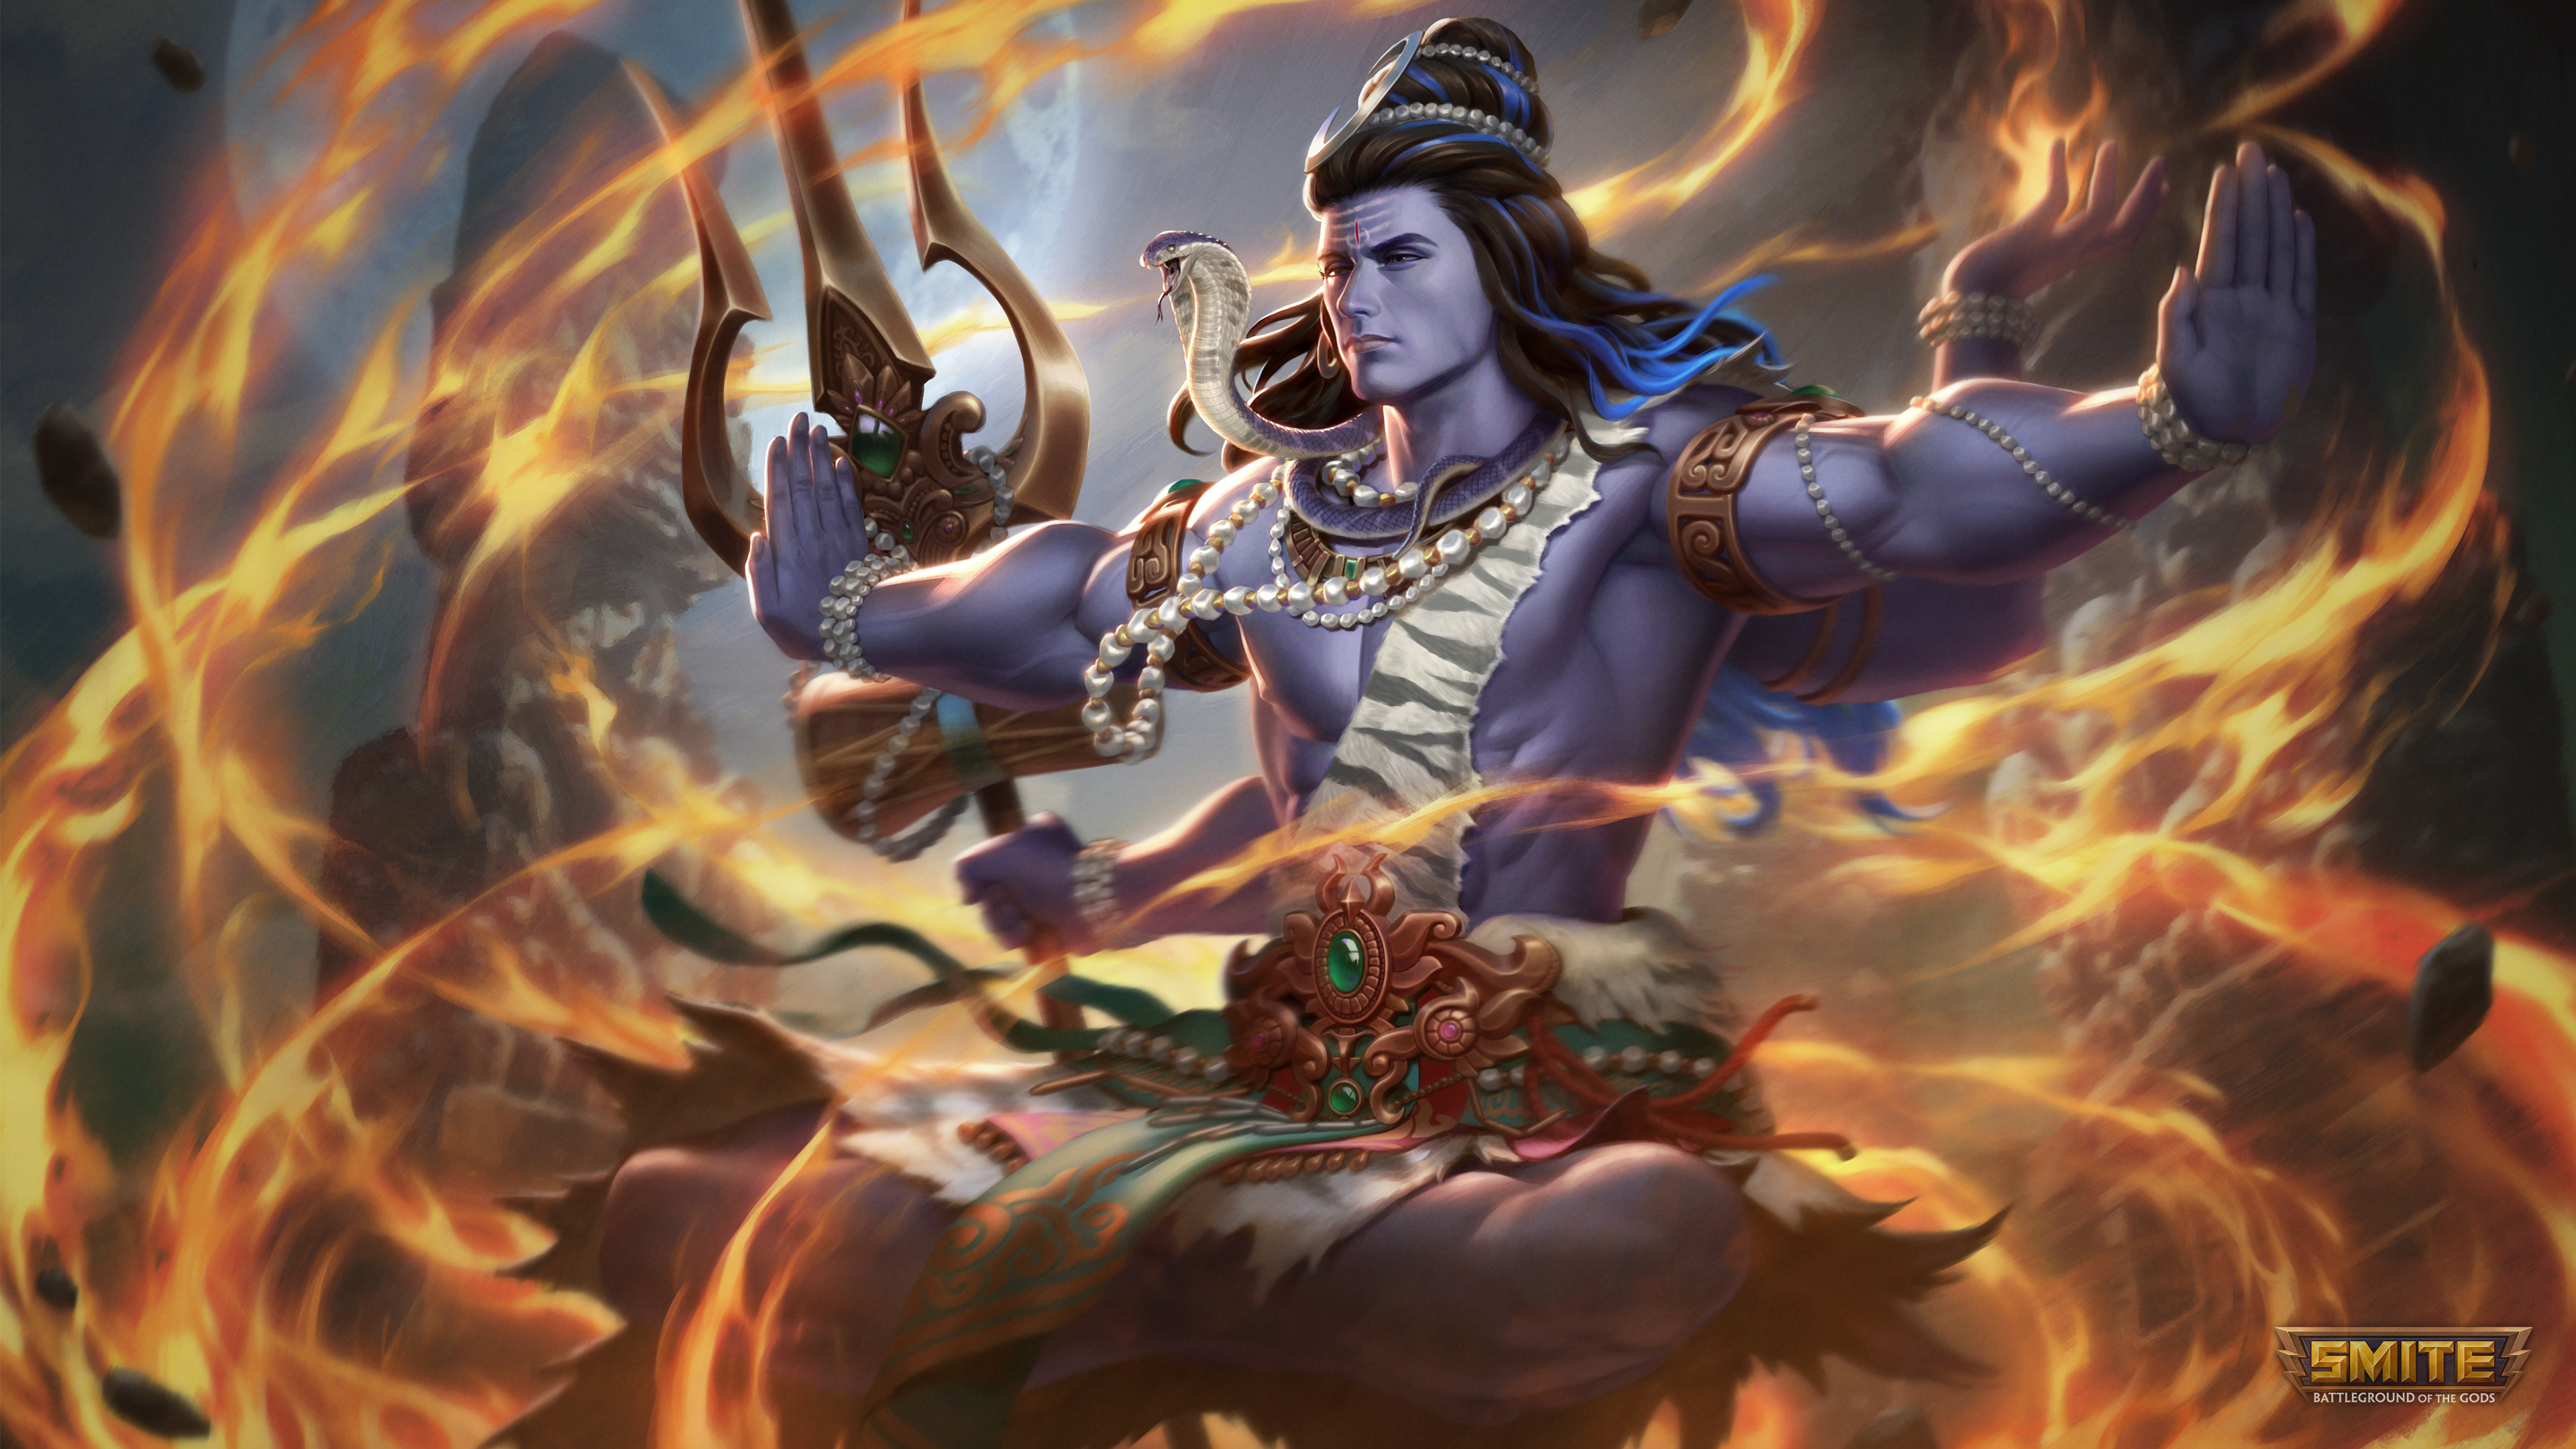 Lord Shiva Wallpaper 4K, The Destroyer, Smite, Games